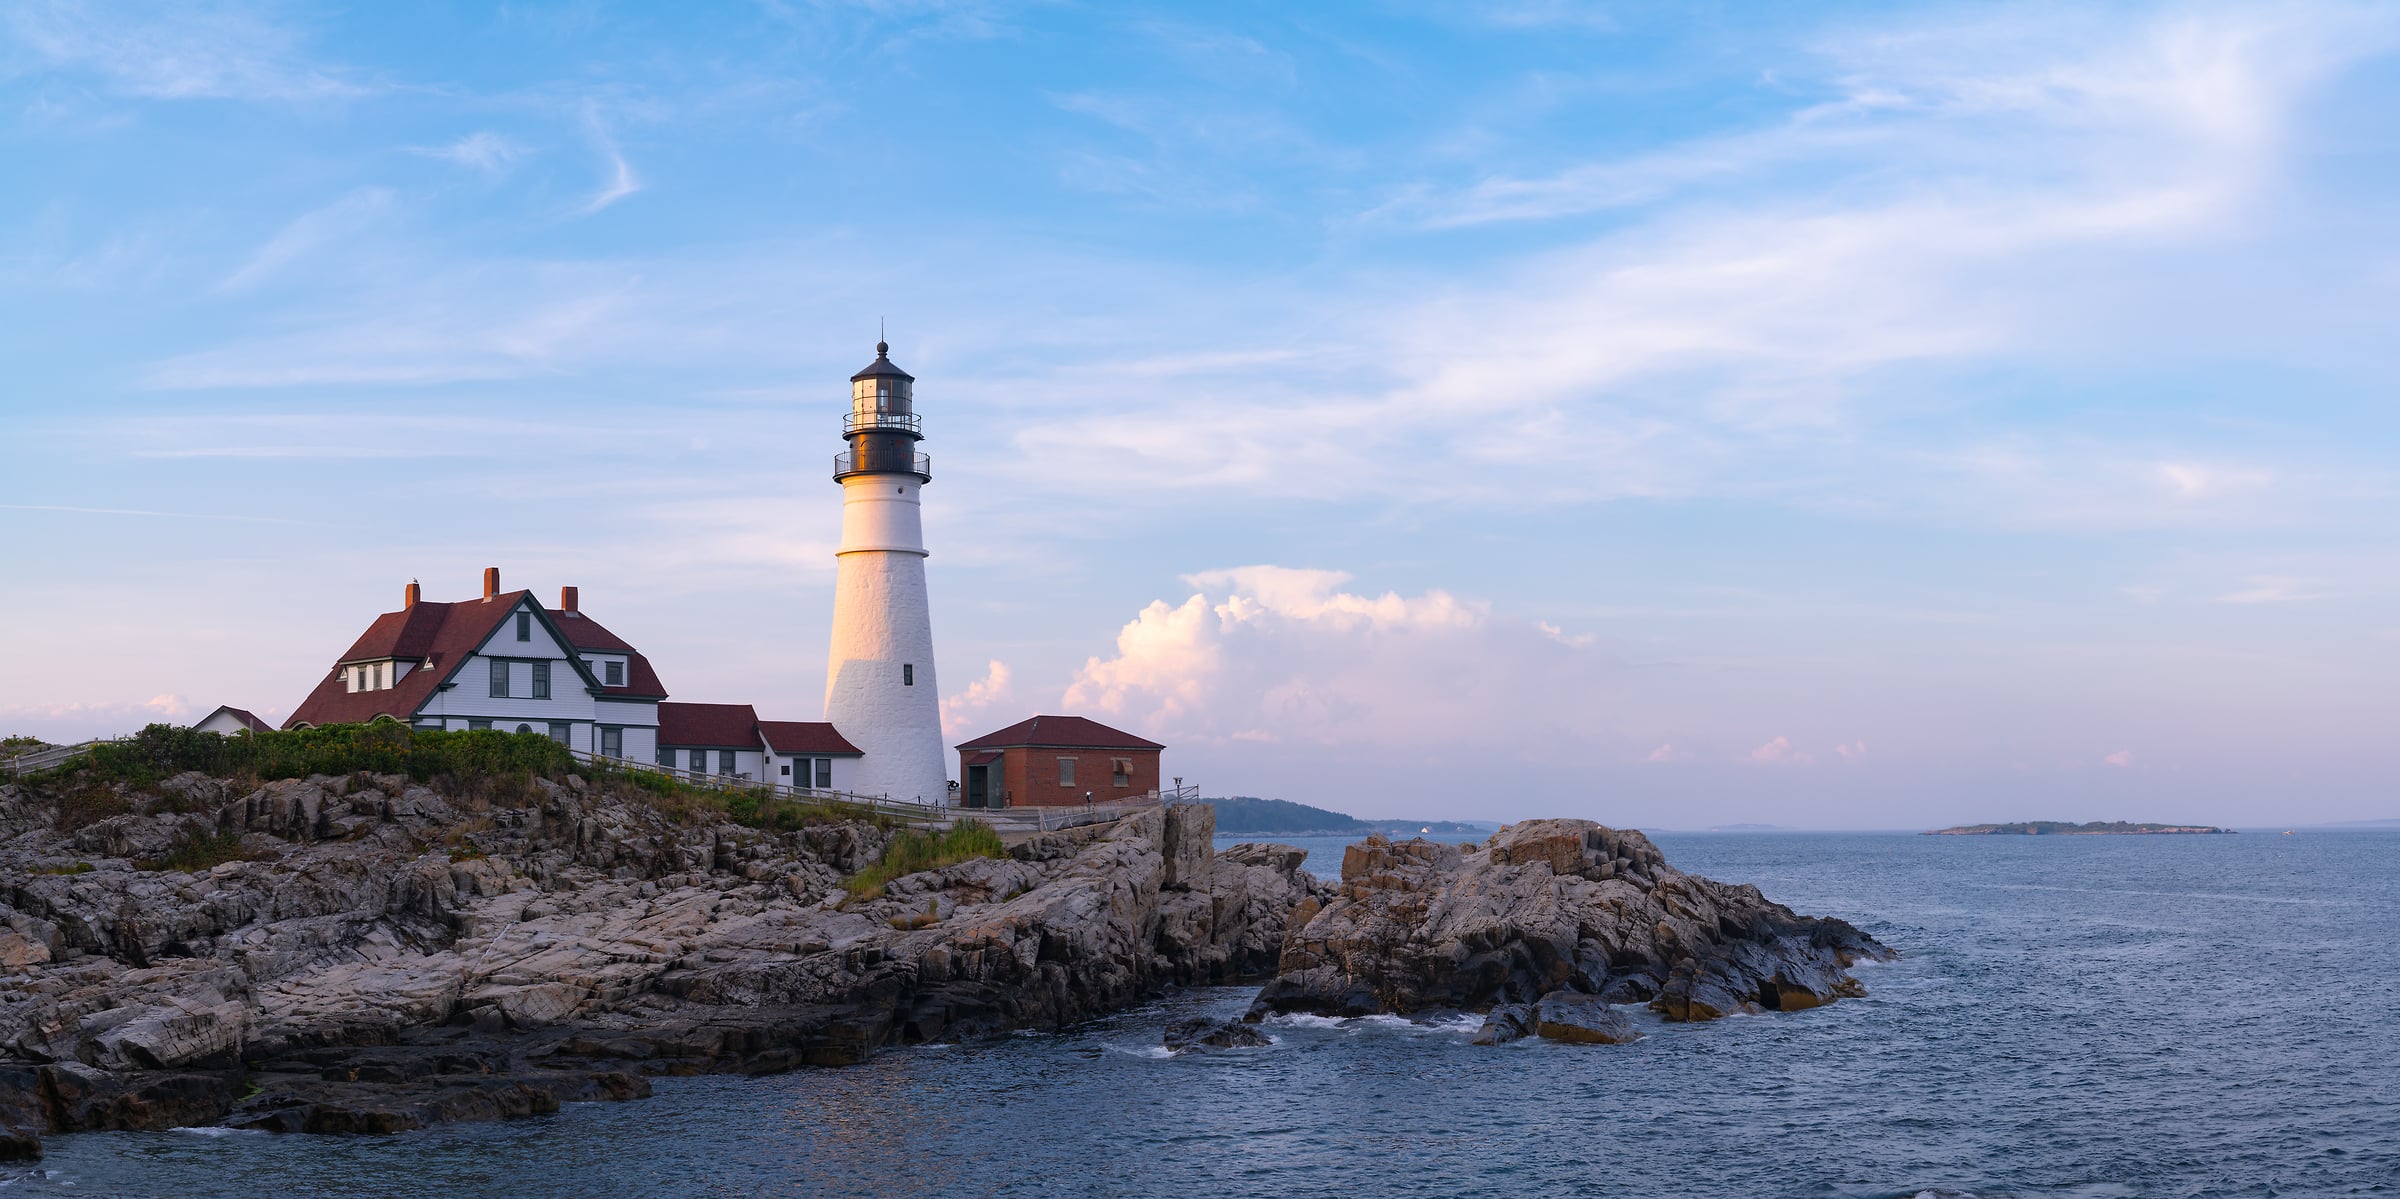 251 megapixels! A very high resolution, large-format VAST photo print of a lighthouse at sunset; photograph created by Greg Probst of the Portland Head Lighthouse in Portland, Maine.